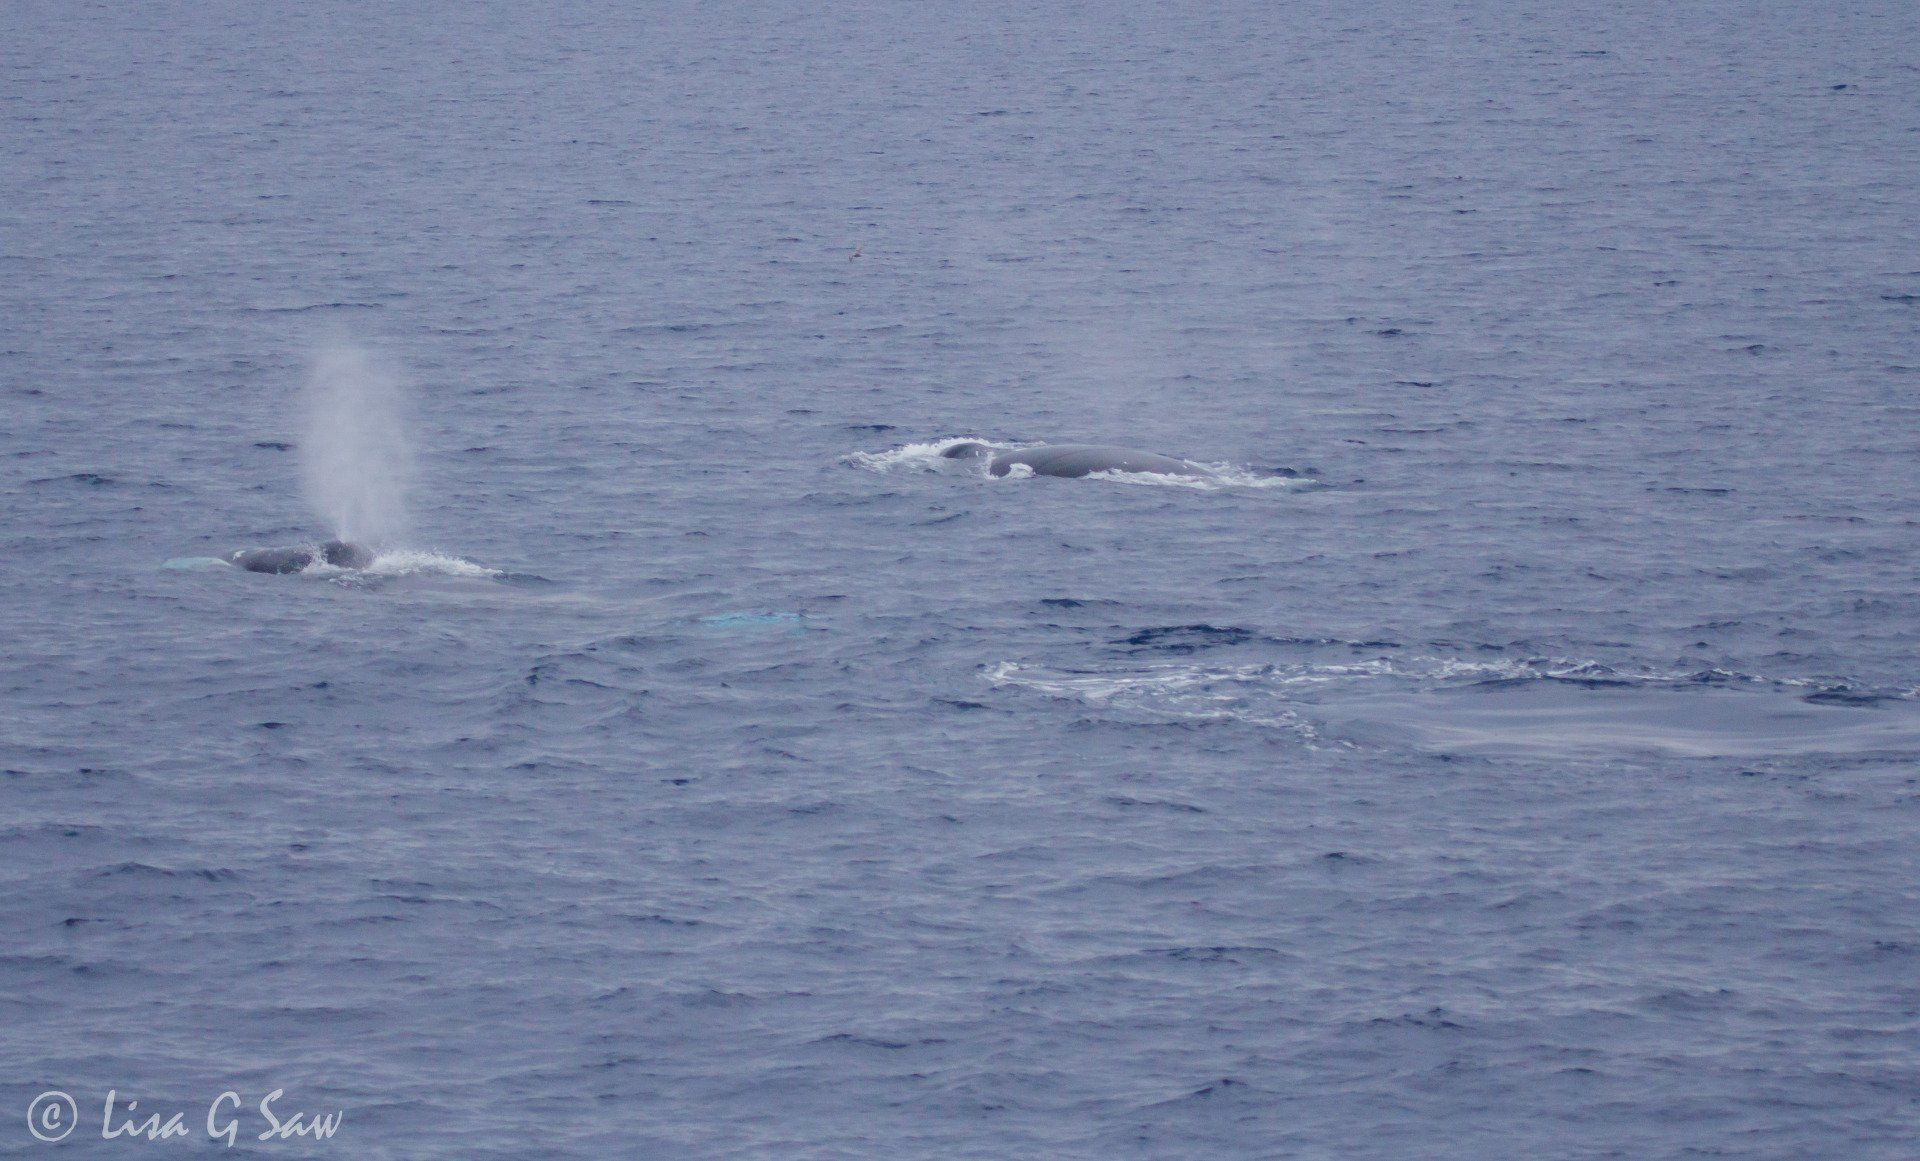 Two Bowhead Whales surfacing alongside each other